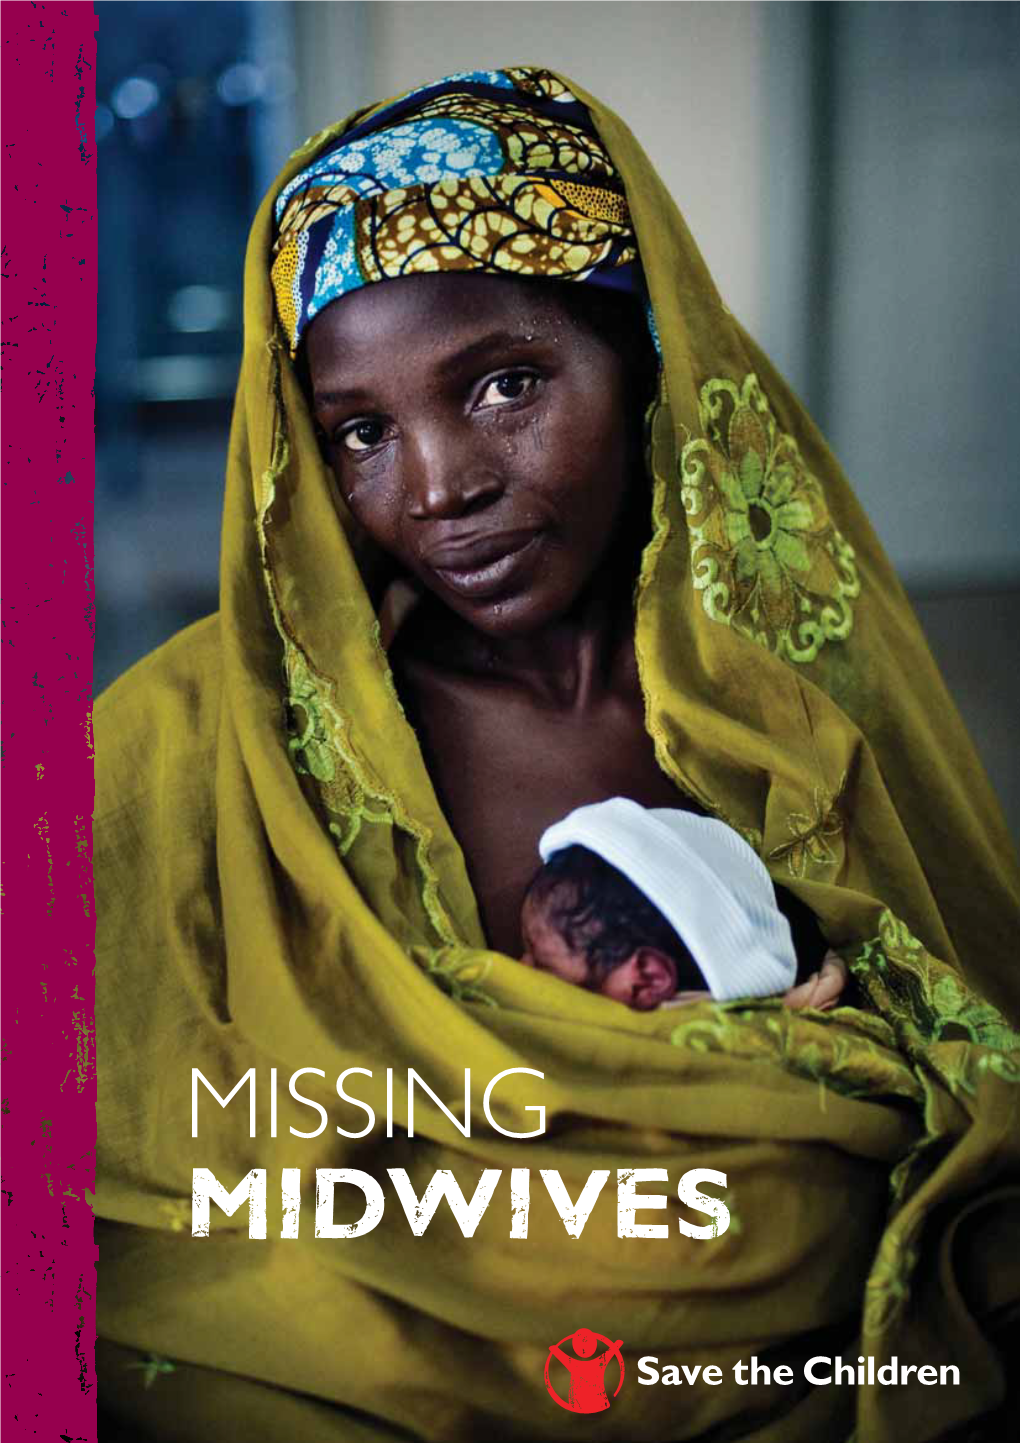 MISSING MIDWIVES MISSING MIDWIVES Save the Children Works in More Than 120 Countries